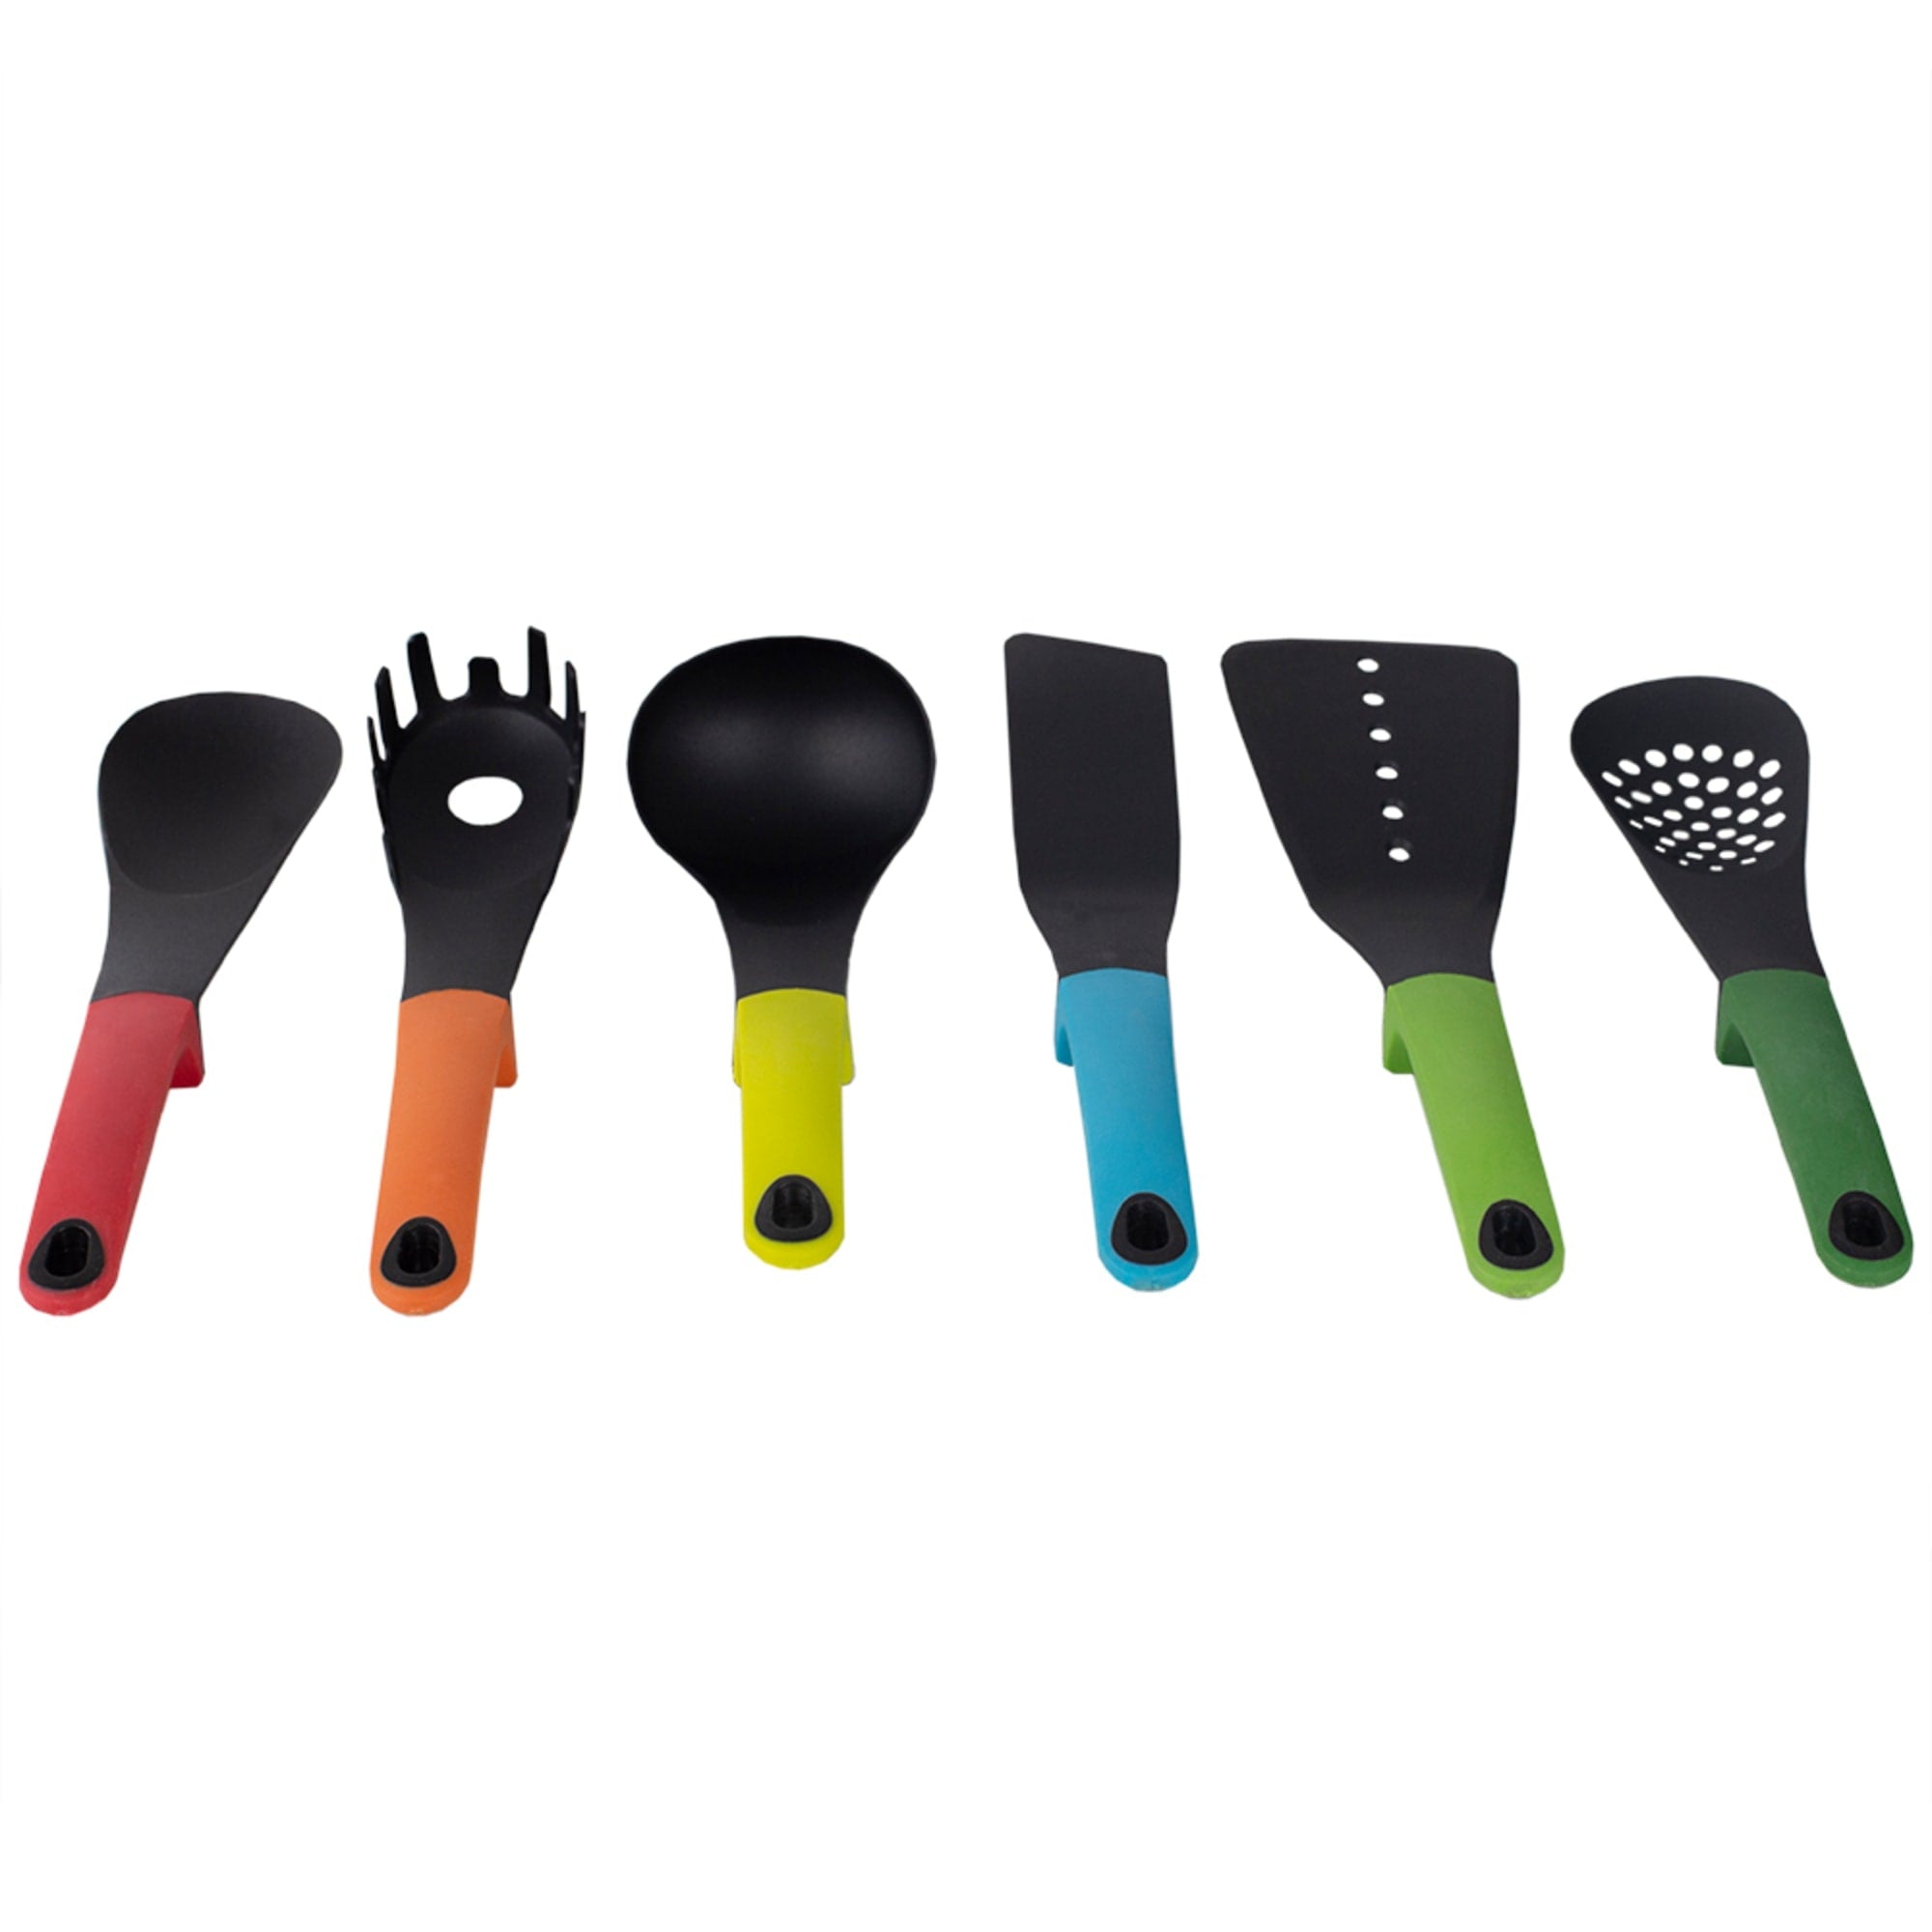 Home Basics 6 Piece Silicone Utensil Set, Multi-Color $10.00 EACH, CASE PACK OF 12